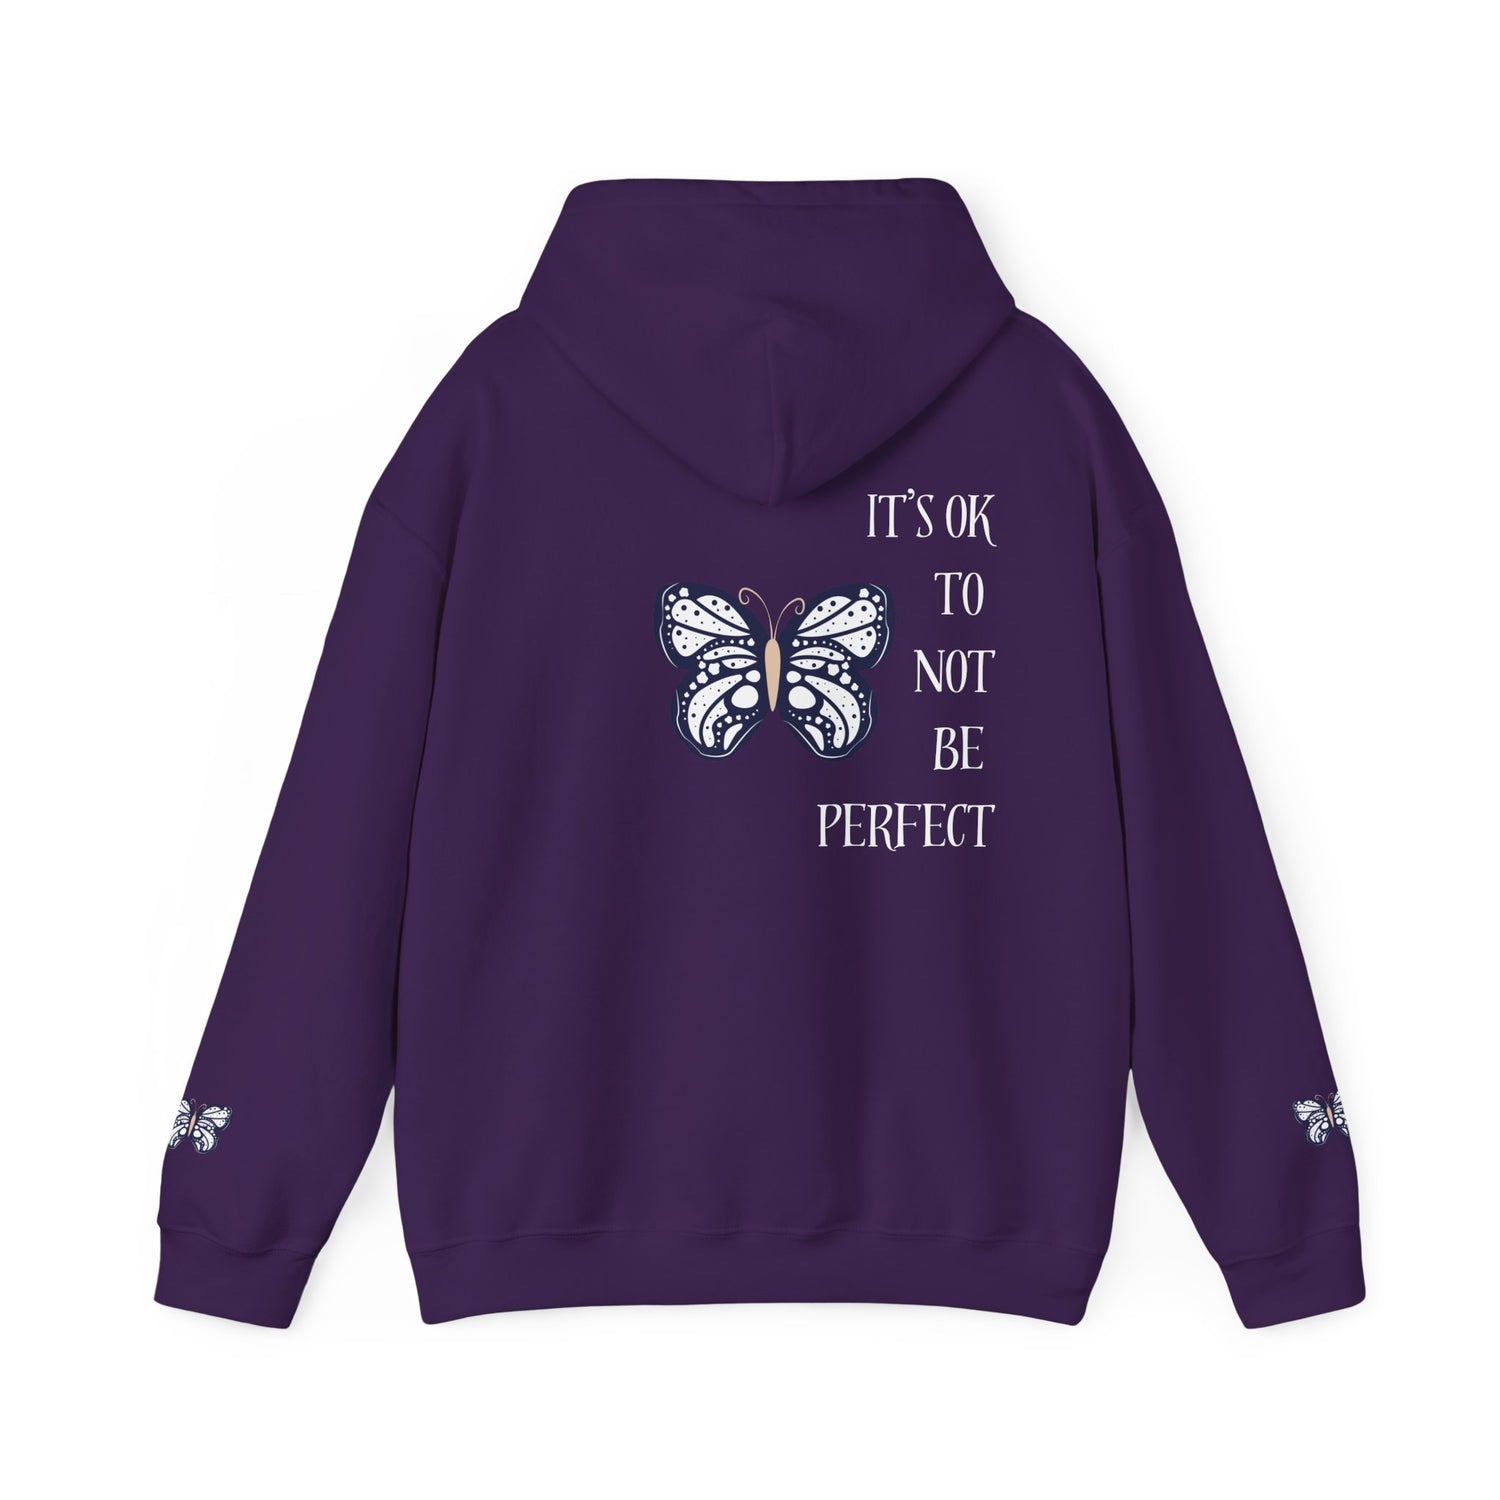 It’s ok to not be perfect - Hooded Sweatshirt